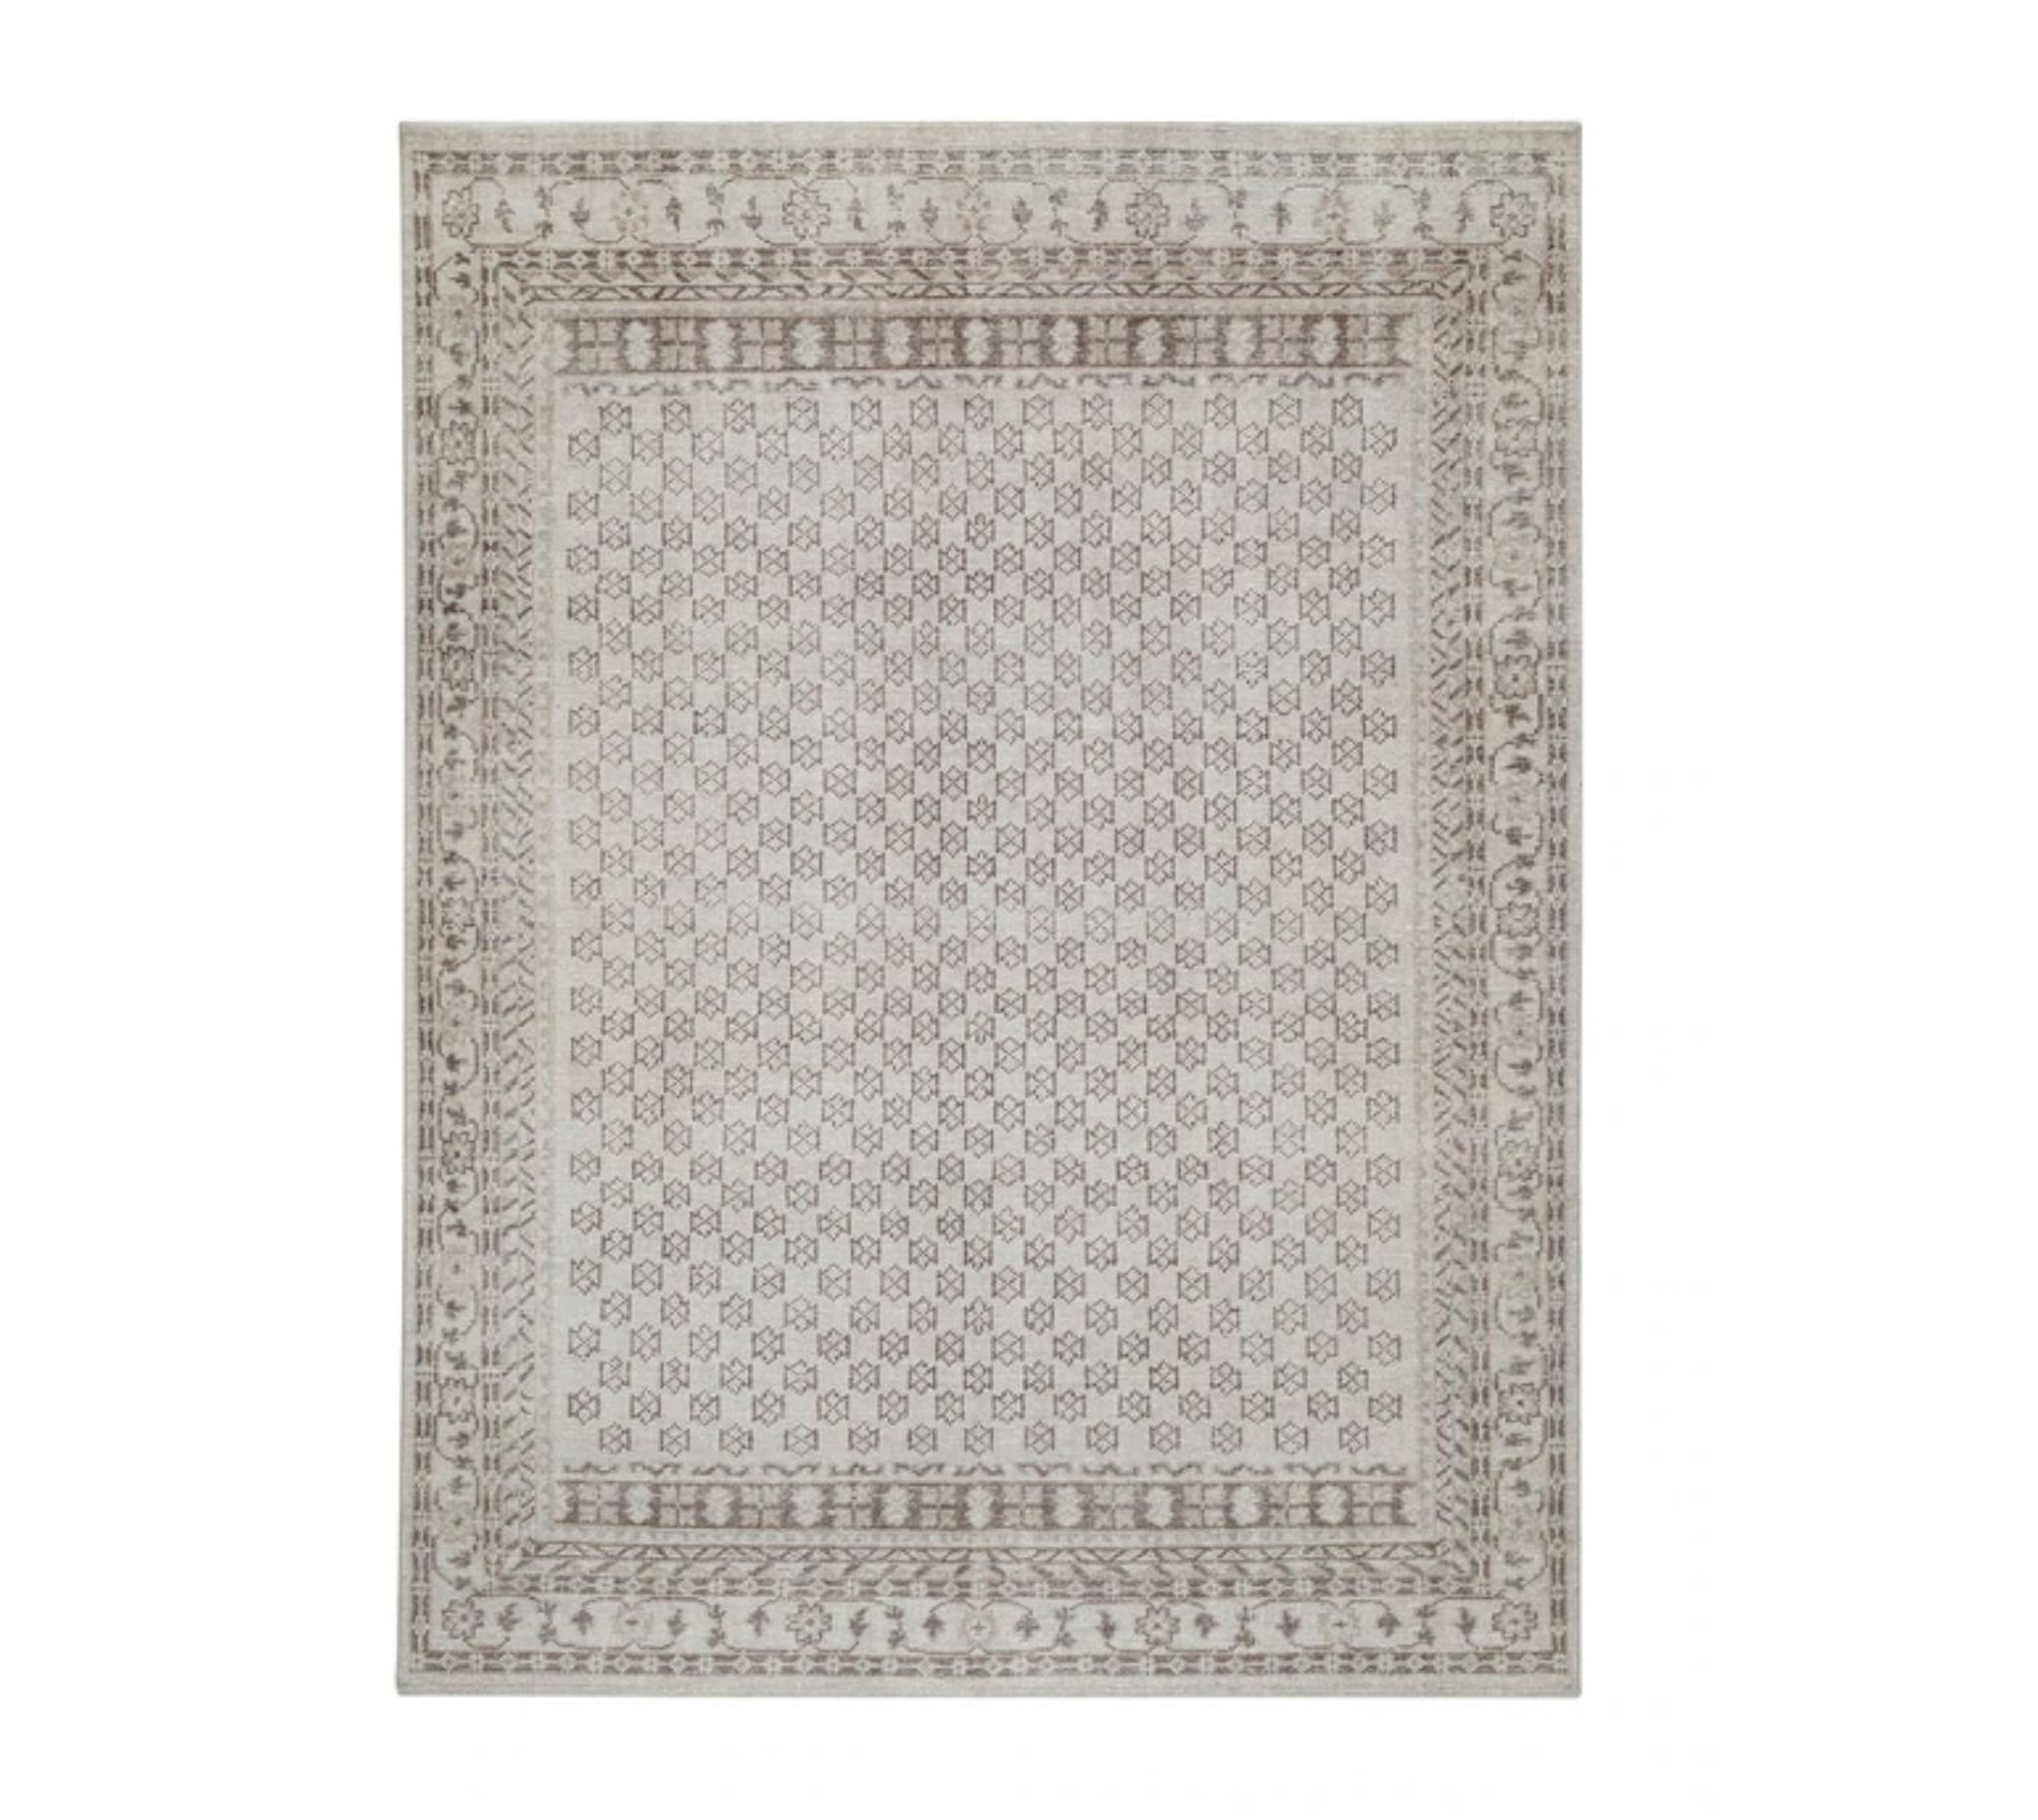 ANYA HAND-KNOTTED RUG 9x12 - McGee & Co.